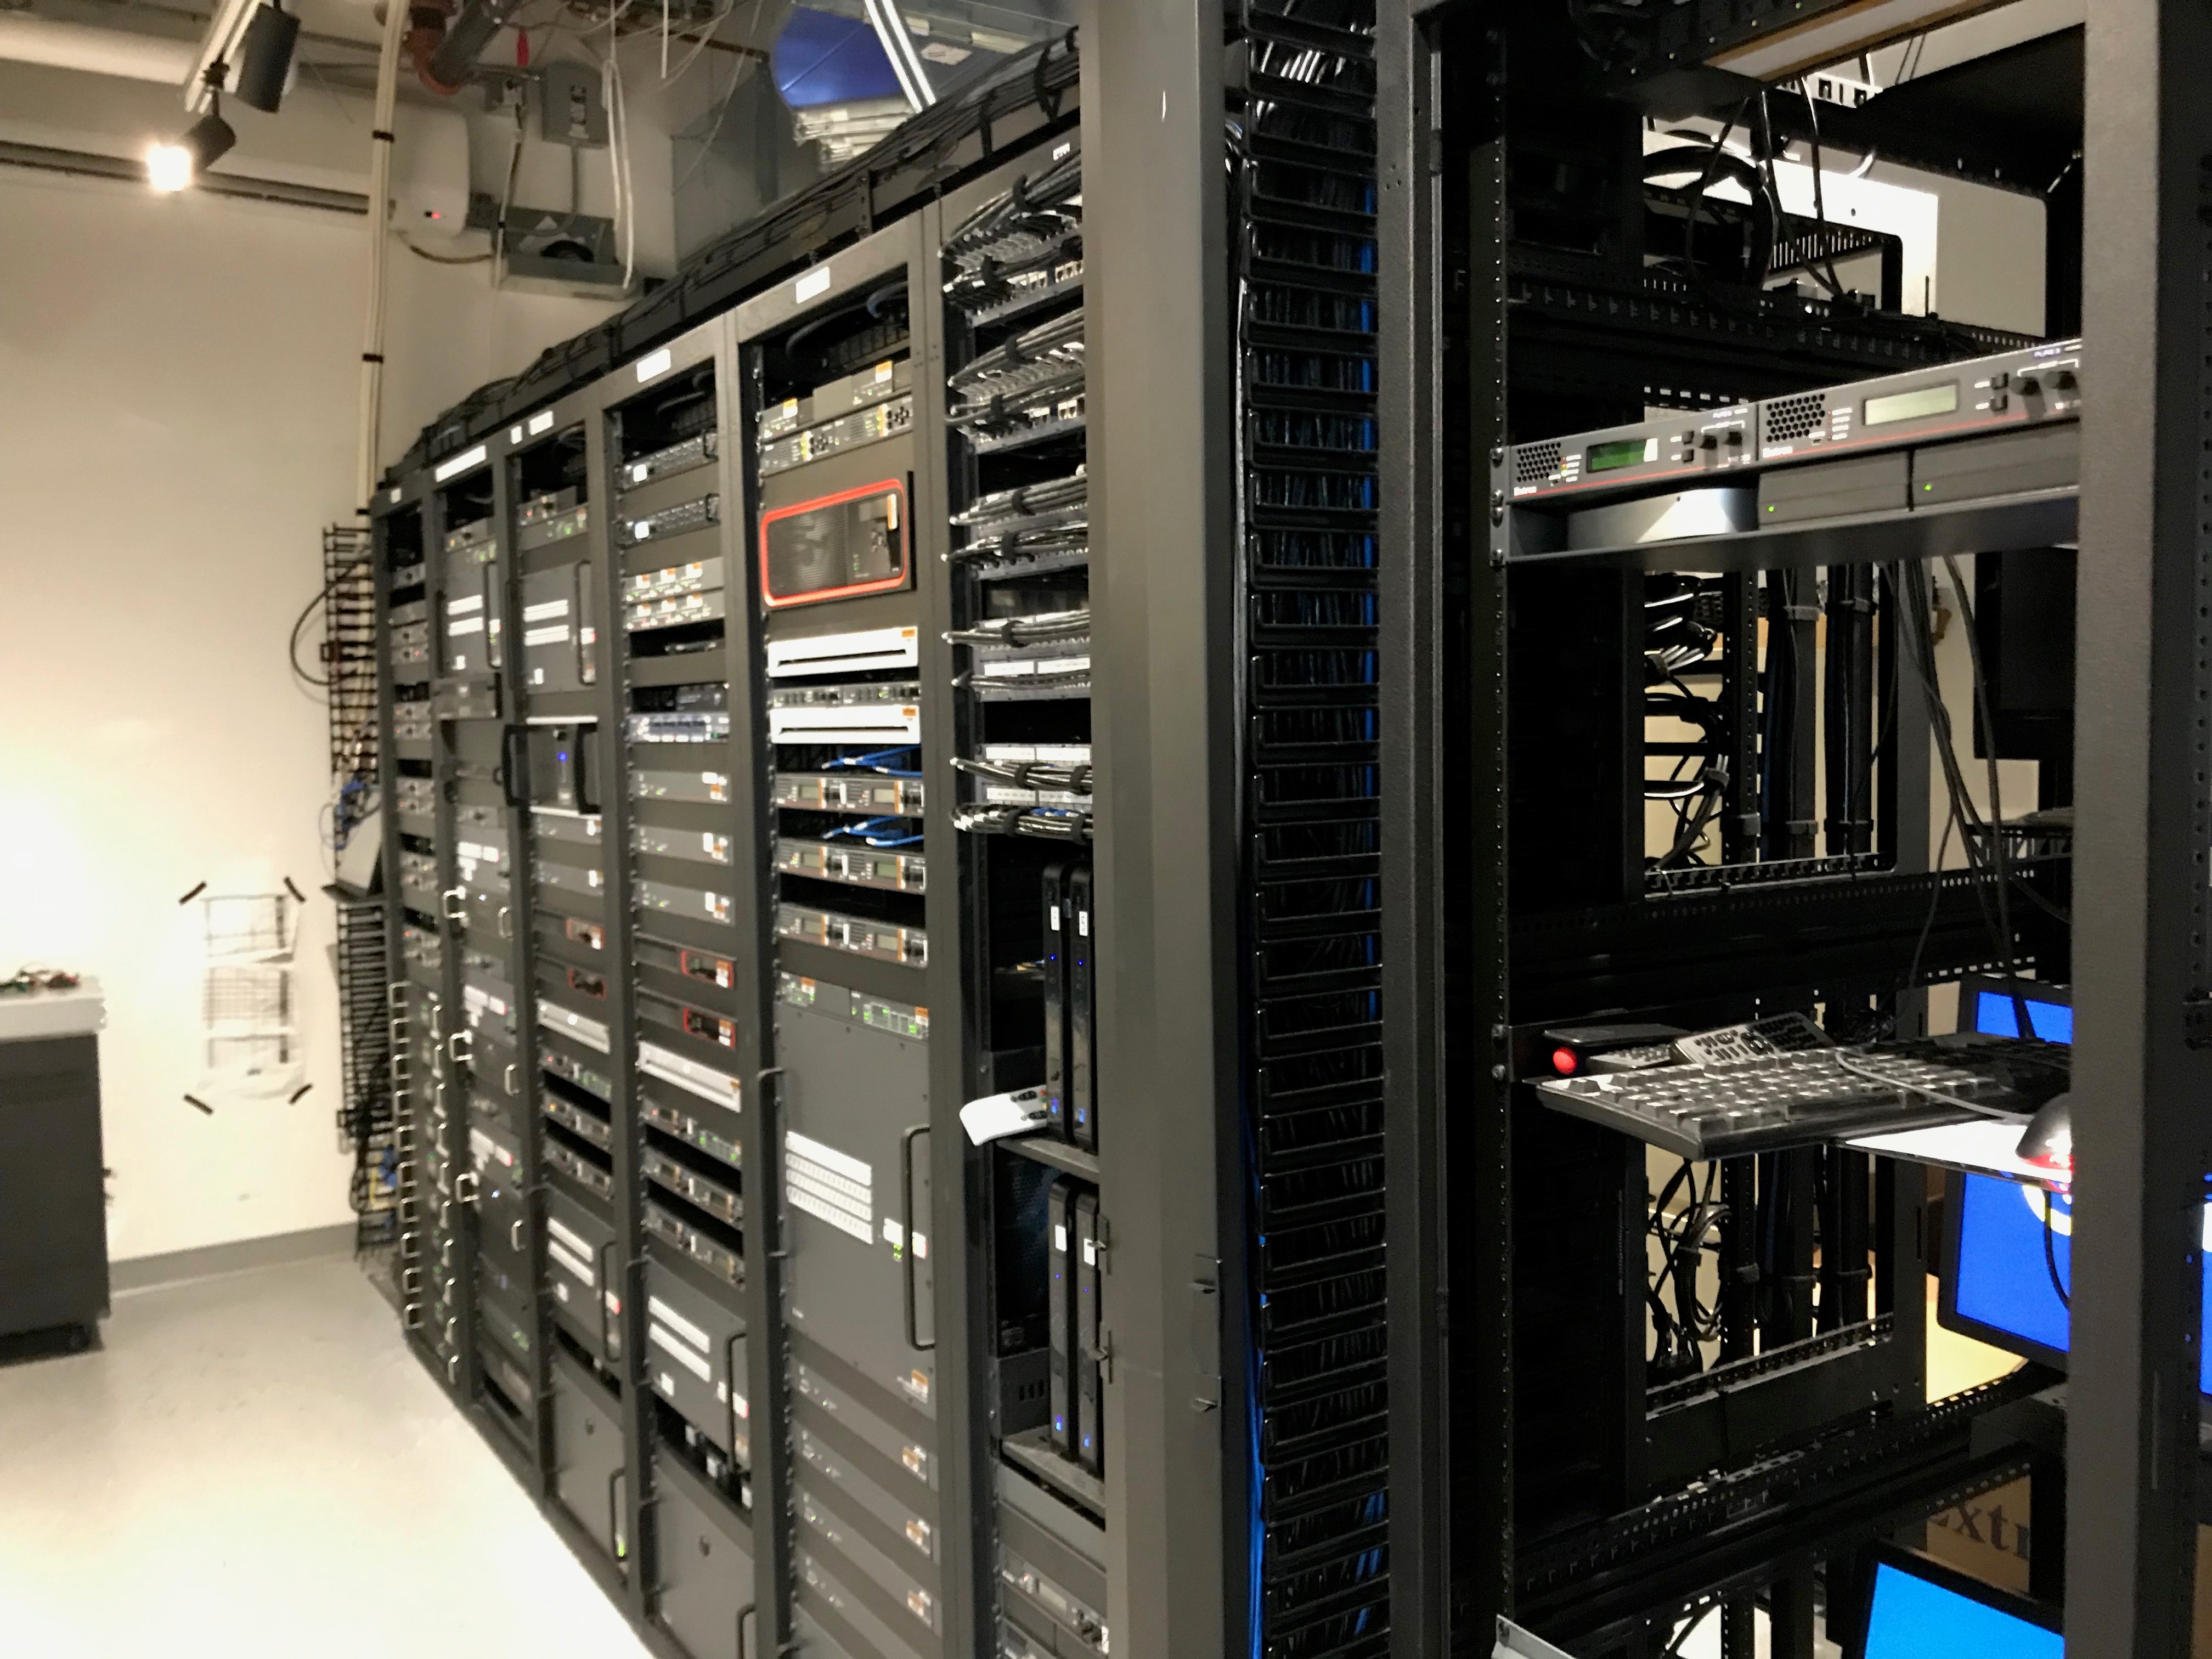 To support activities throughout the Symantec Experience Center, Extron switching, streaming, and processing systems are rack-mounted in the centrally located AV Control Room.